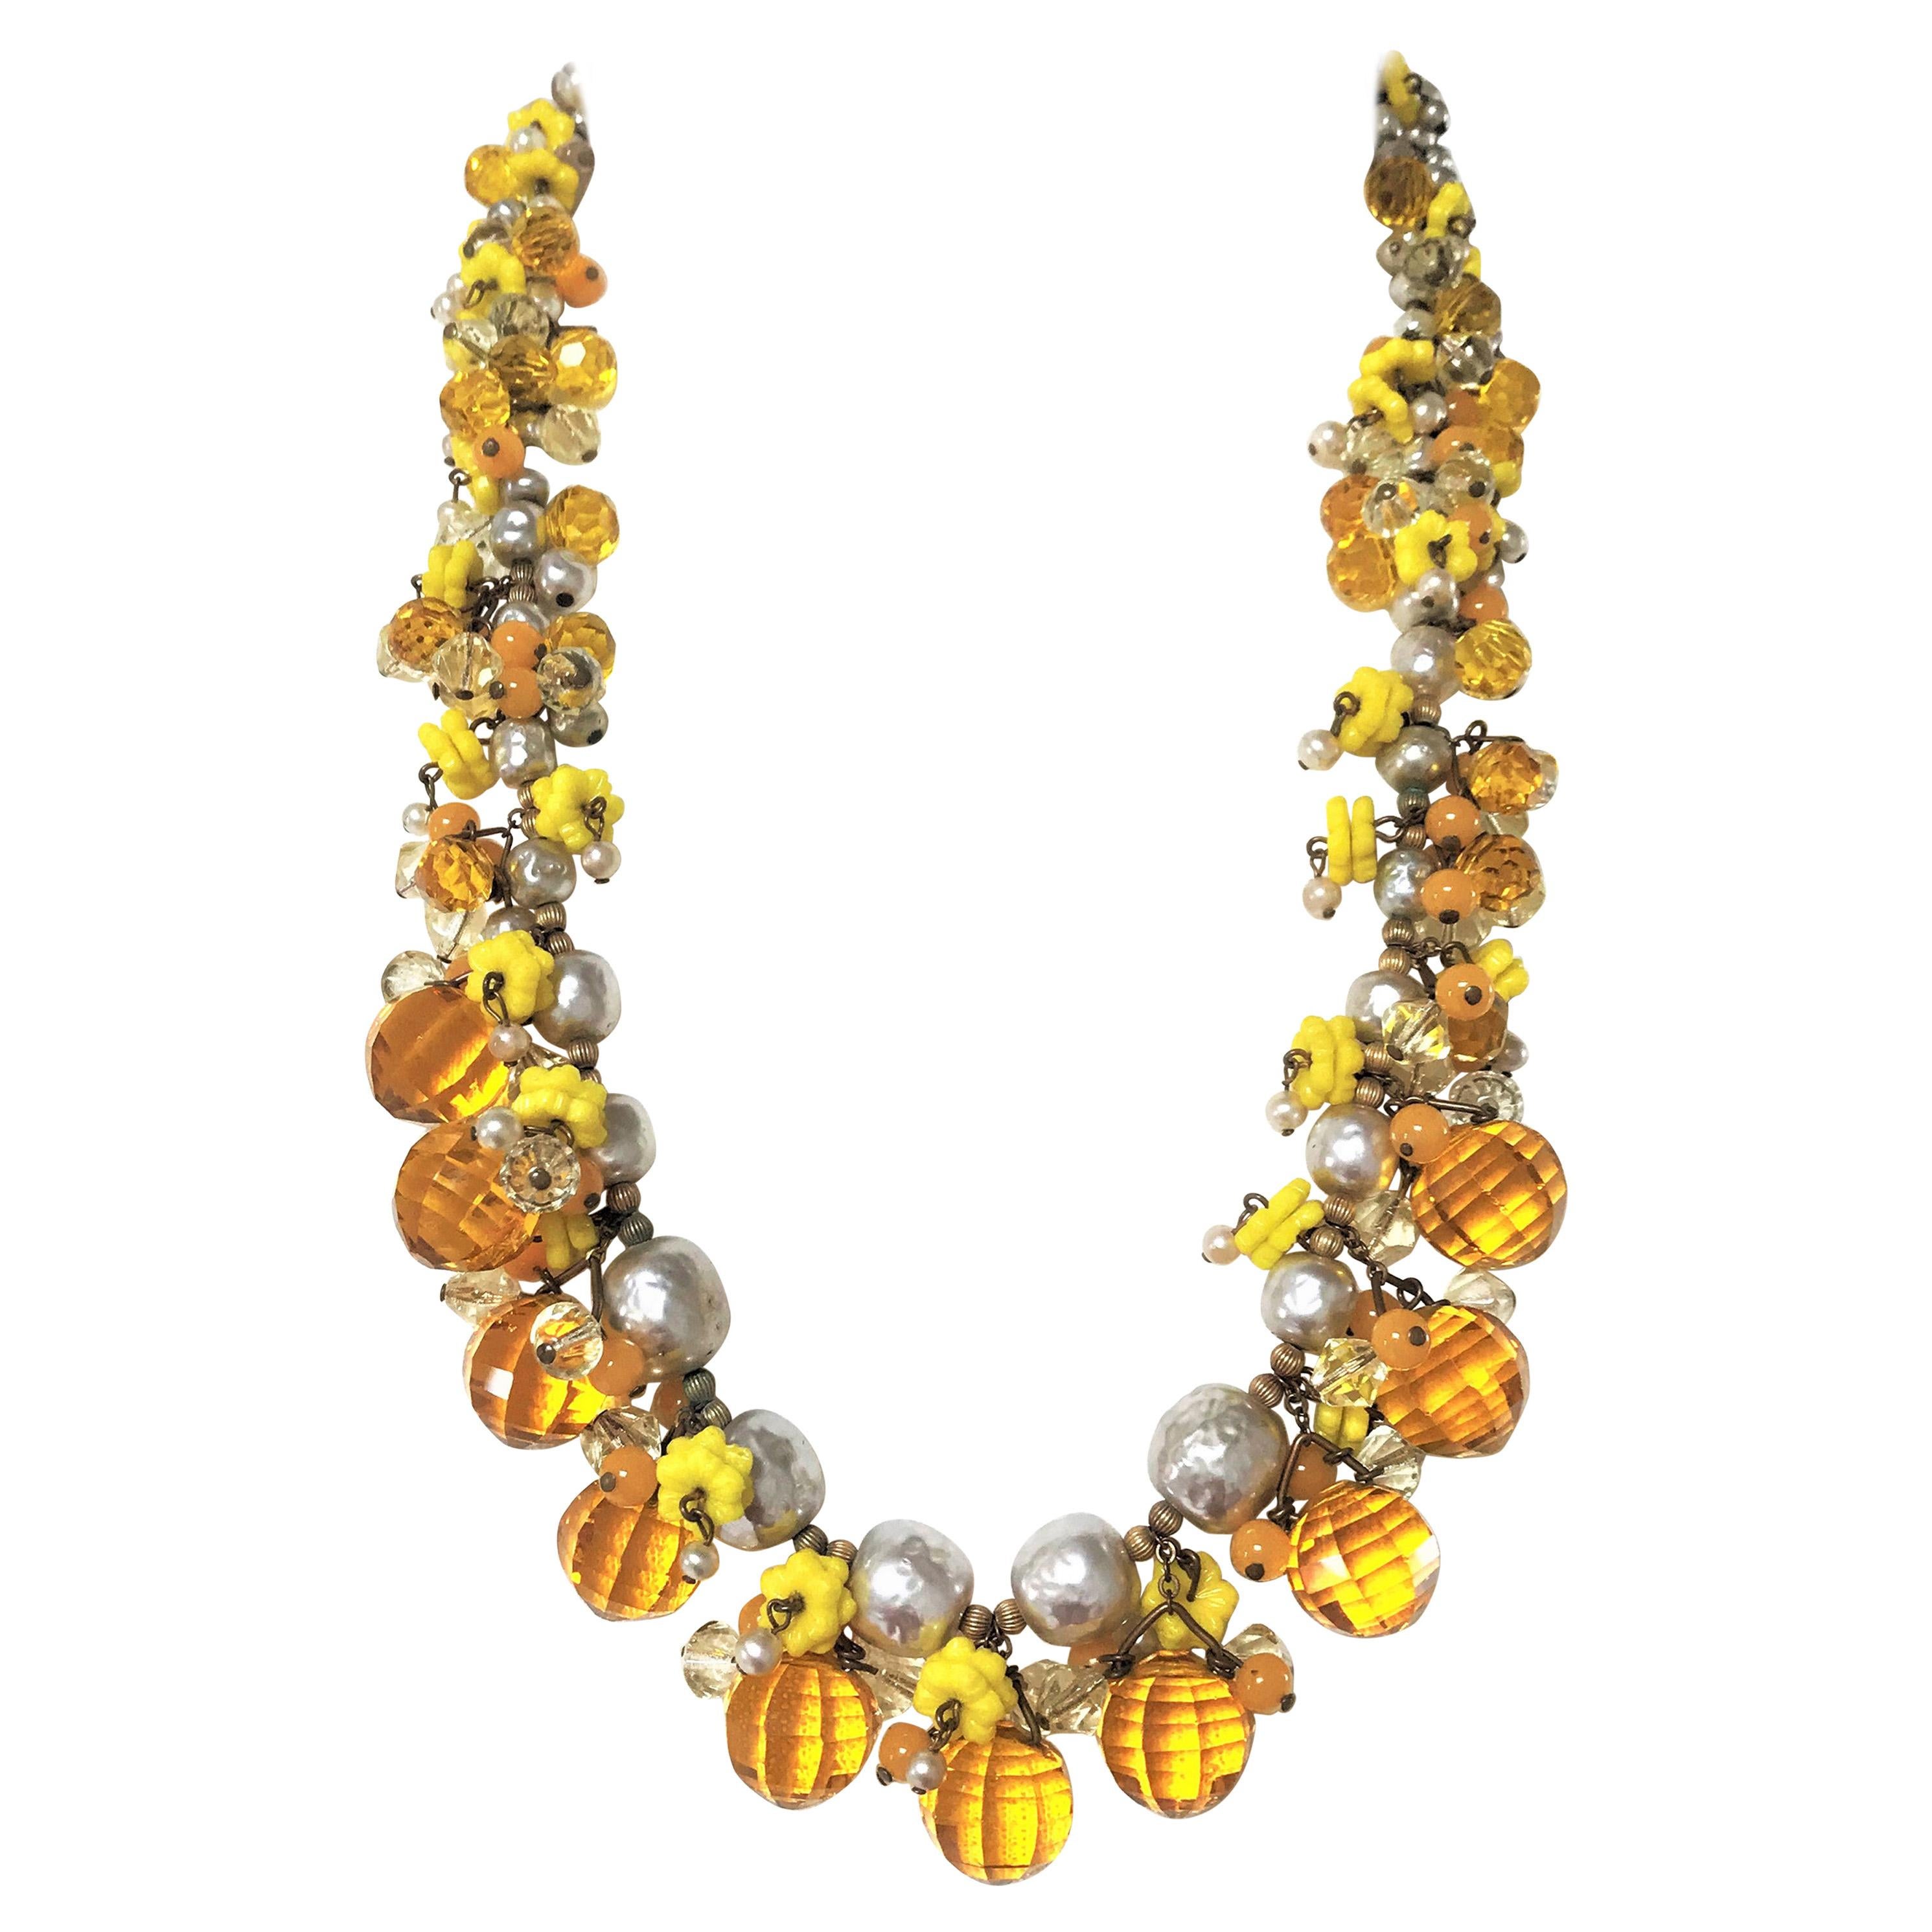 MIRIAM HASKELL necklace book piece 1950s with many cut yellow glass balls